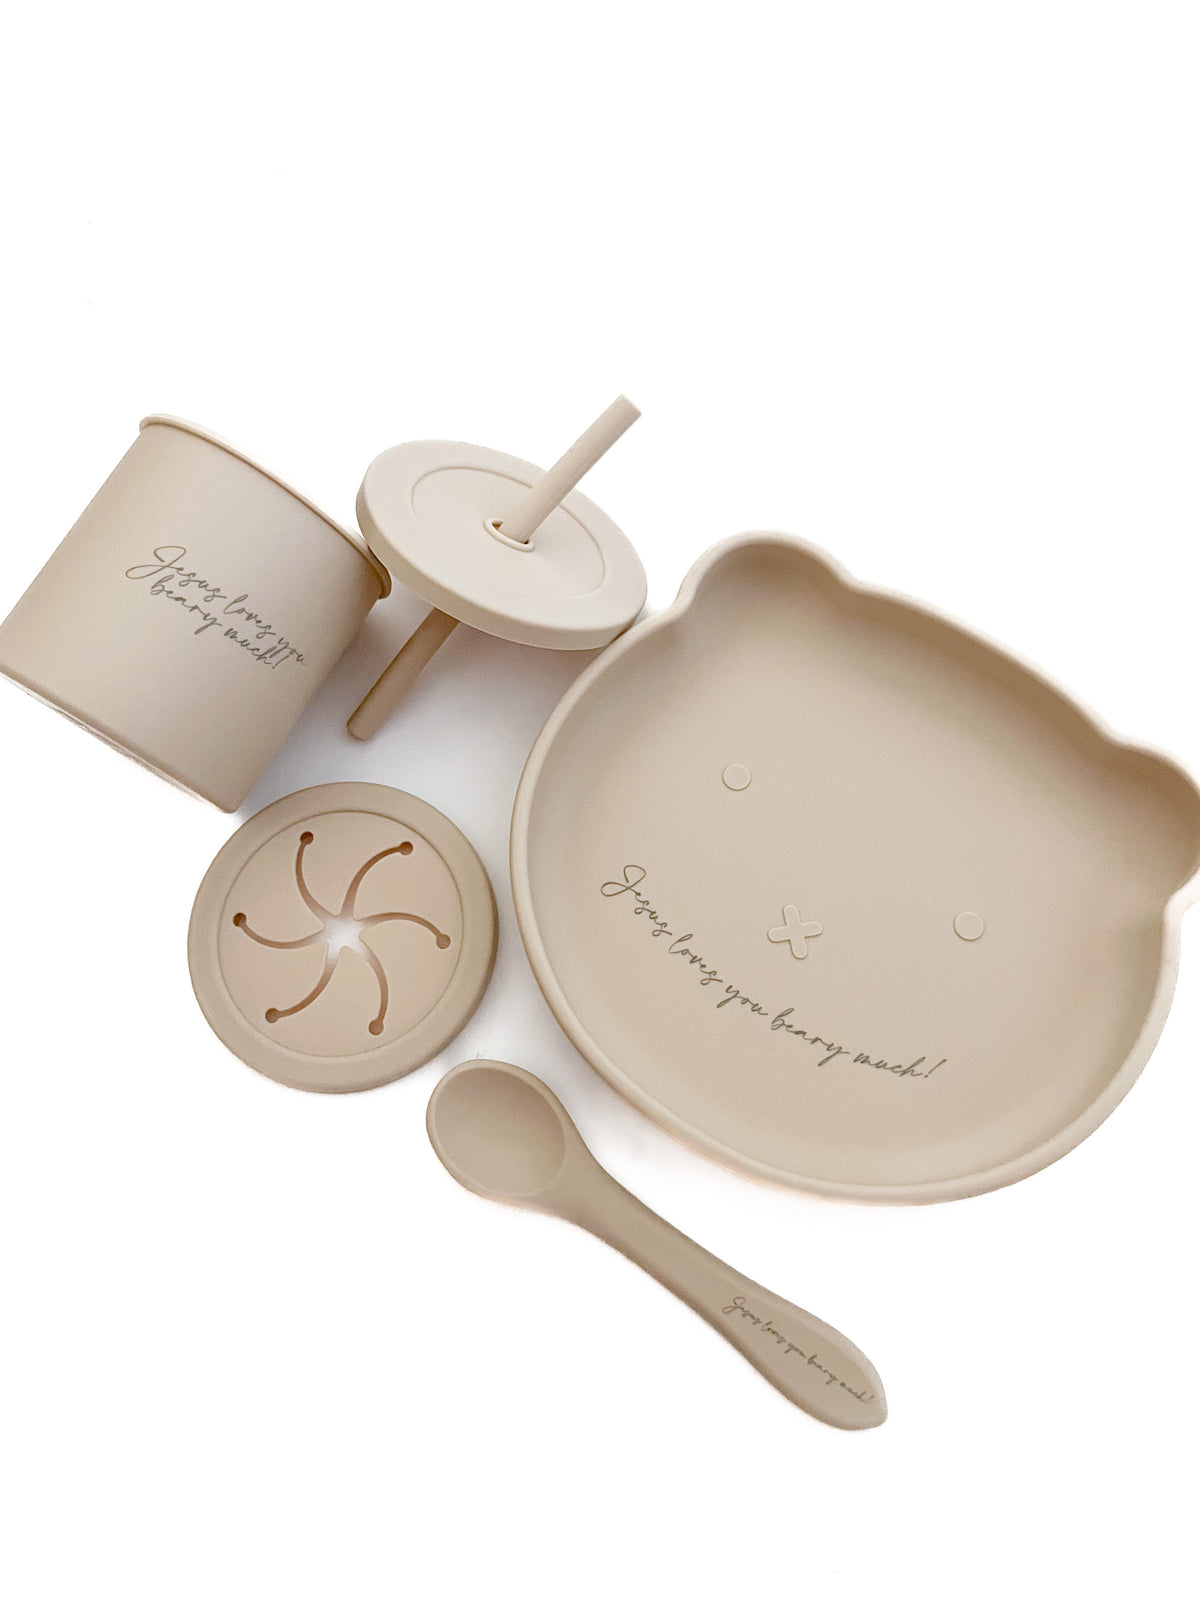 Jesus Loves You Beary Much Cup, Plate & Spoon Set